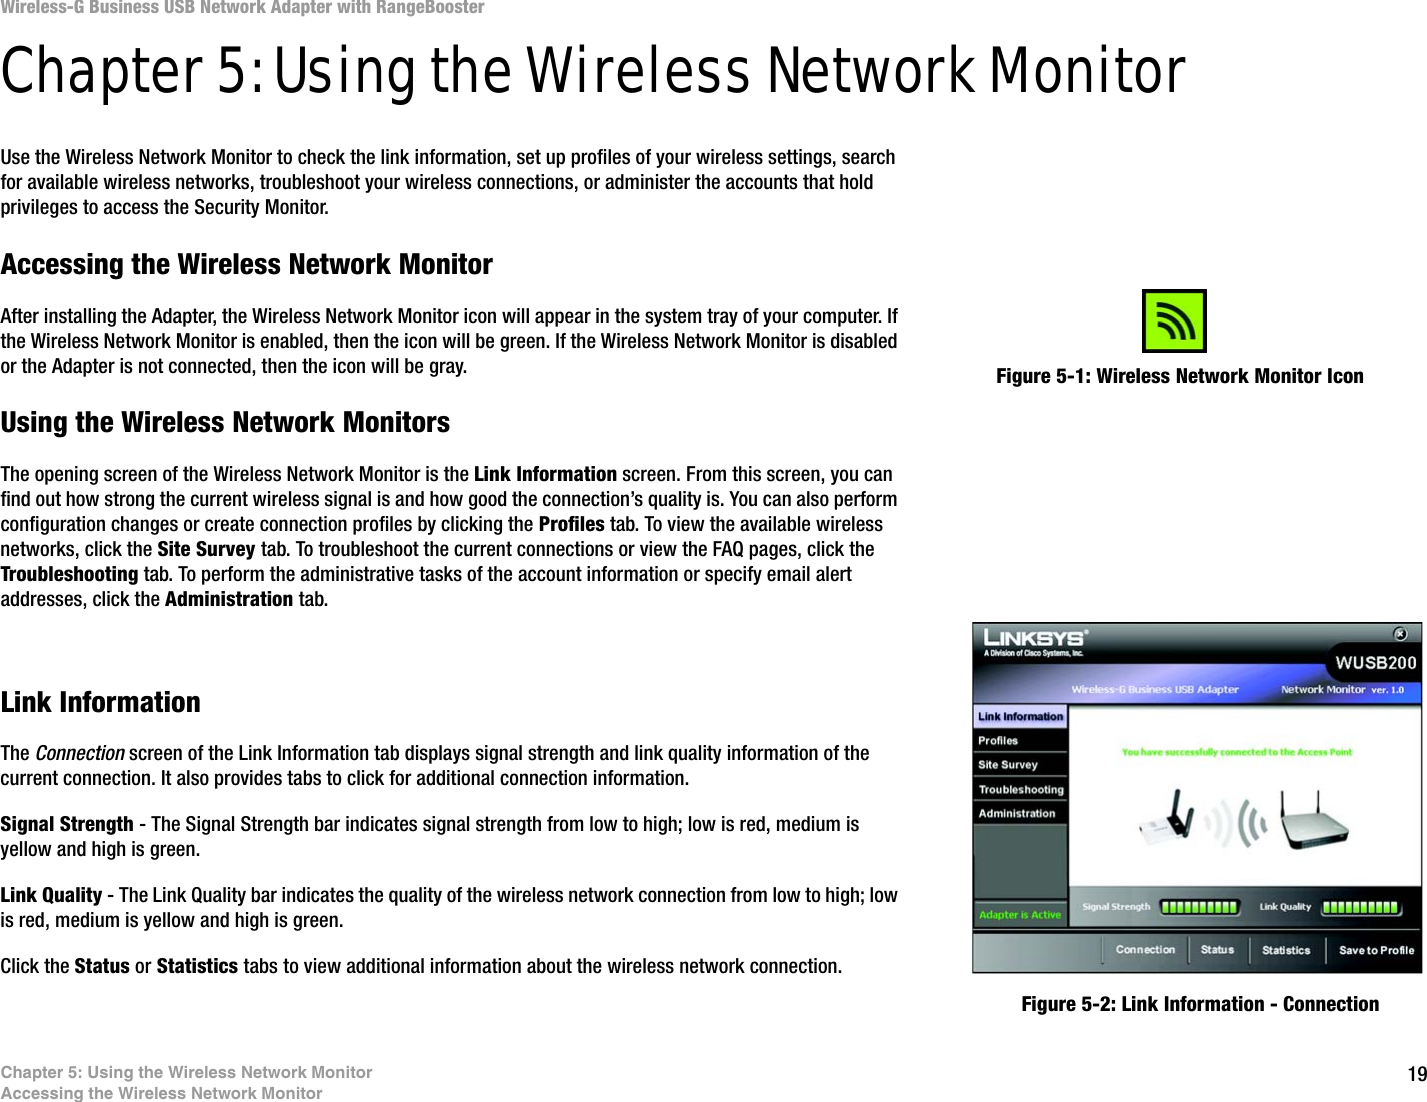 19Chapter 5: Using the Wireless Network MonitorAccessing the Wireless Network MonitorWireless-G Business USB Network Adapter with RangeBoosterChapter 5: Using the Wireless Network MonitorUse the Wireless Network Monitor to check the link information, set up profiles of your wireless settings, search for available wireless networks, troubleshoot your wireless connections, or administer the accounts that hold privileges to access the Security Monitor.Accessing the Wireless Network MonitorAfter installing the Adapter, the Wireless Network Monitor icon will appear in the system tray of your computer. If the Wireless Network Monitor is enabled, then the icon will be green. If the Wireless Network Monitor is disabled or the Adapter is not connected, then the icon will be gray.Using the Wireless Network MonitorsThe opening screen of the Wireless Network Monitor is the Link Information screen. From this screen, you can find out how strong the current wireless signal is and how good the connection’s quality is. You can also perform configuration changes or create connection profiles by clicking the Profiles tab. To view the available wireless networks, click the Site Survey tab. To troubleshoot the current connections or view the FAQ pages, click the Troubleshooting tab. To perform the administrative tasks of the account information or specify email alert addresses, click the Administration tab.Link InformationThe Connection screen of the Link Information tab displays signal strength and link quality information of the current connection. It also provides tabs to click for additional connection information.Signal Strength - The Signal Strength bar indicates signal strength from low to high; low is red, medium is yellow and high is green. Link Quality - The Link Quality bar indicates the quality of the wireless network connection from low to high; low is red, medium is yellow and high is green. Click the Status or Statistics tabs to view additional information about the wireless network connection.Figure 5-1: Wireless Network Monitor IconFigure 5-2: Link Information - Connection